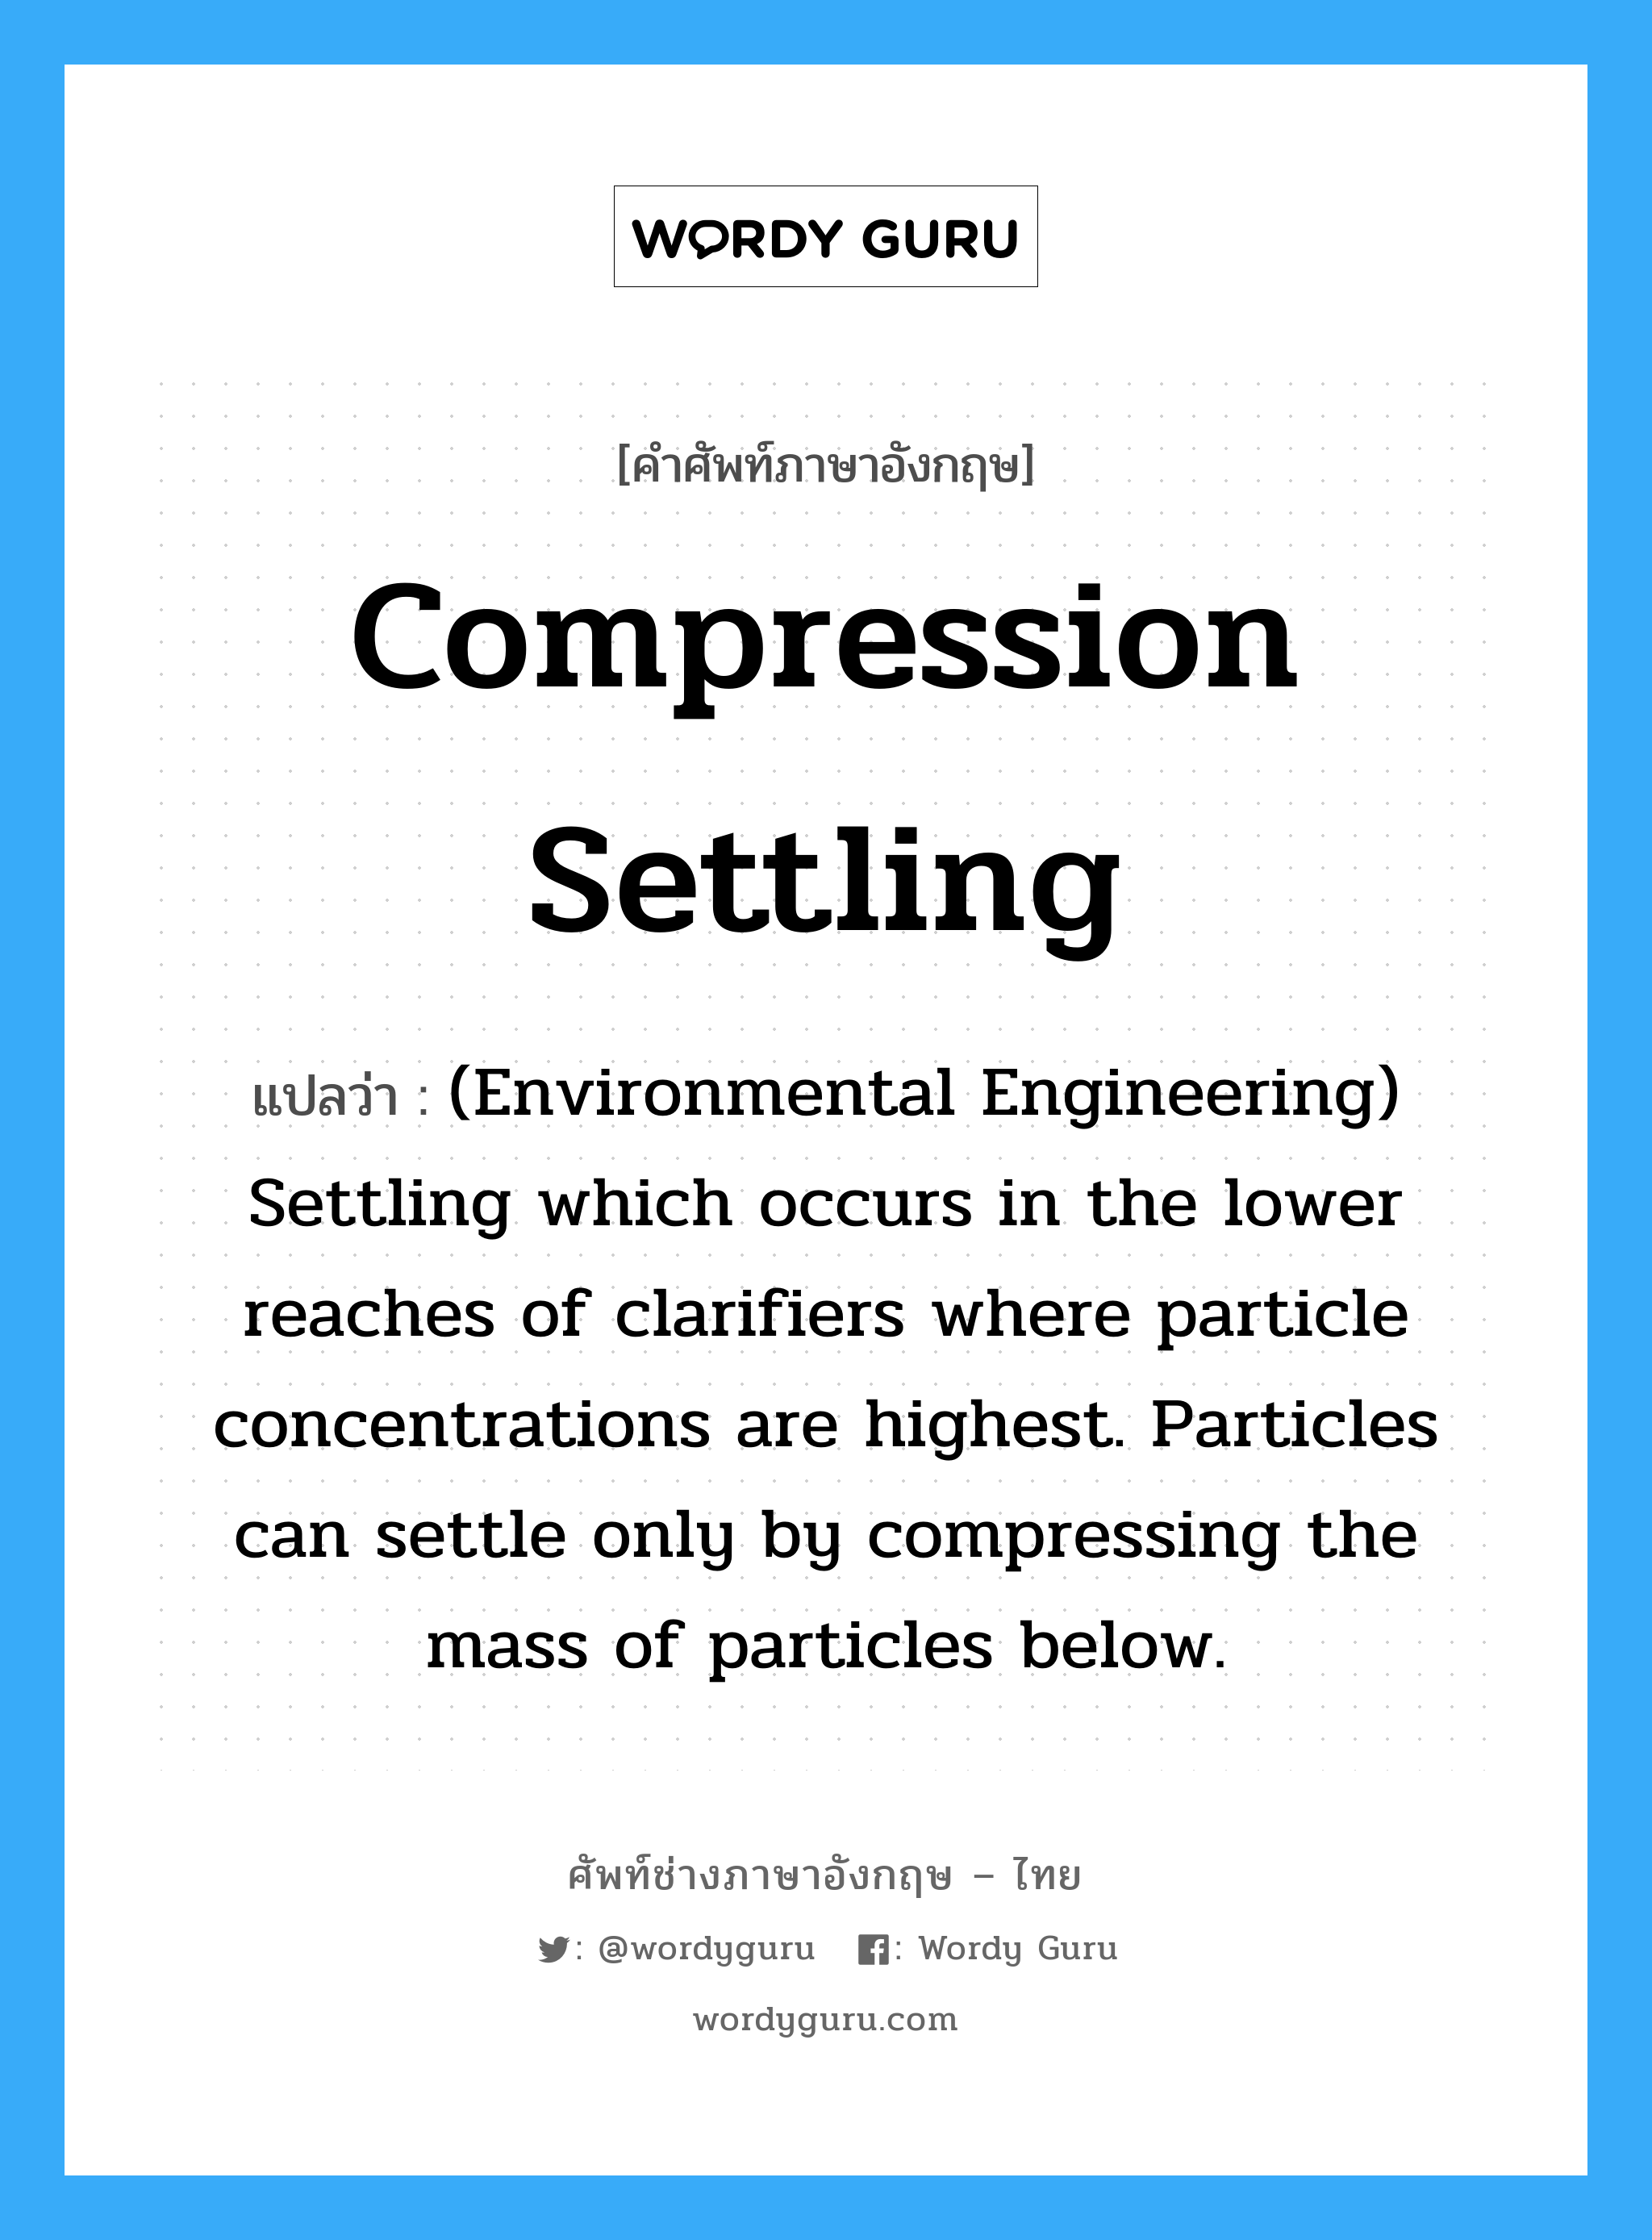 Compression settling แปลว่า?, คำศัพท์ช่างภาษาอังกฤษ - ไทย Compression settling คำศัพท์ภาษาอังกฤษ Compression settling แปลว่า (Environmental Engineering) Settling which occurs in the lower reaches of clarifiers where particle concentrations are highest. Particles can settle only by compressing the mass of particles below.